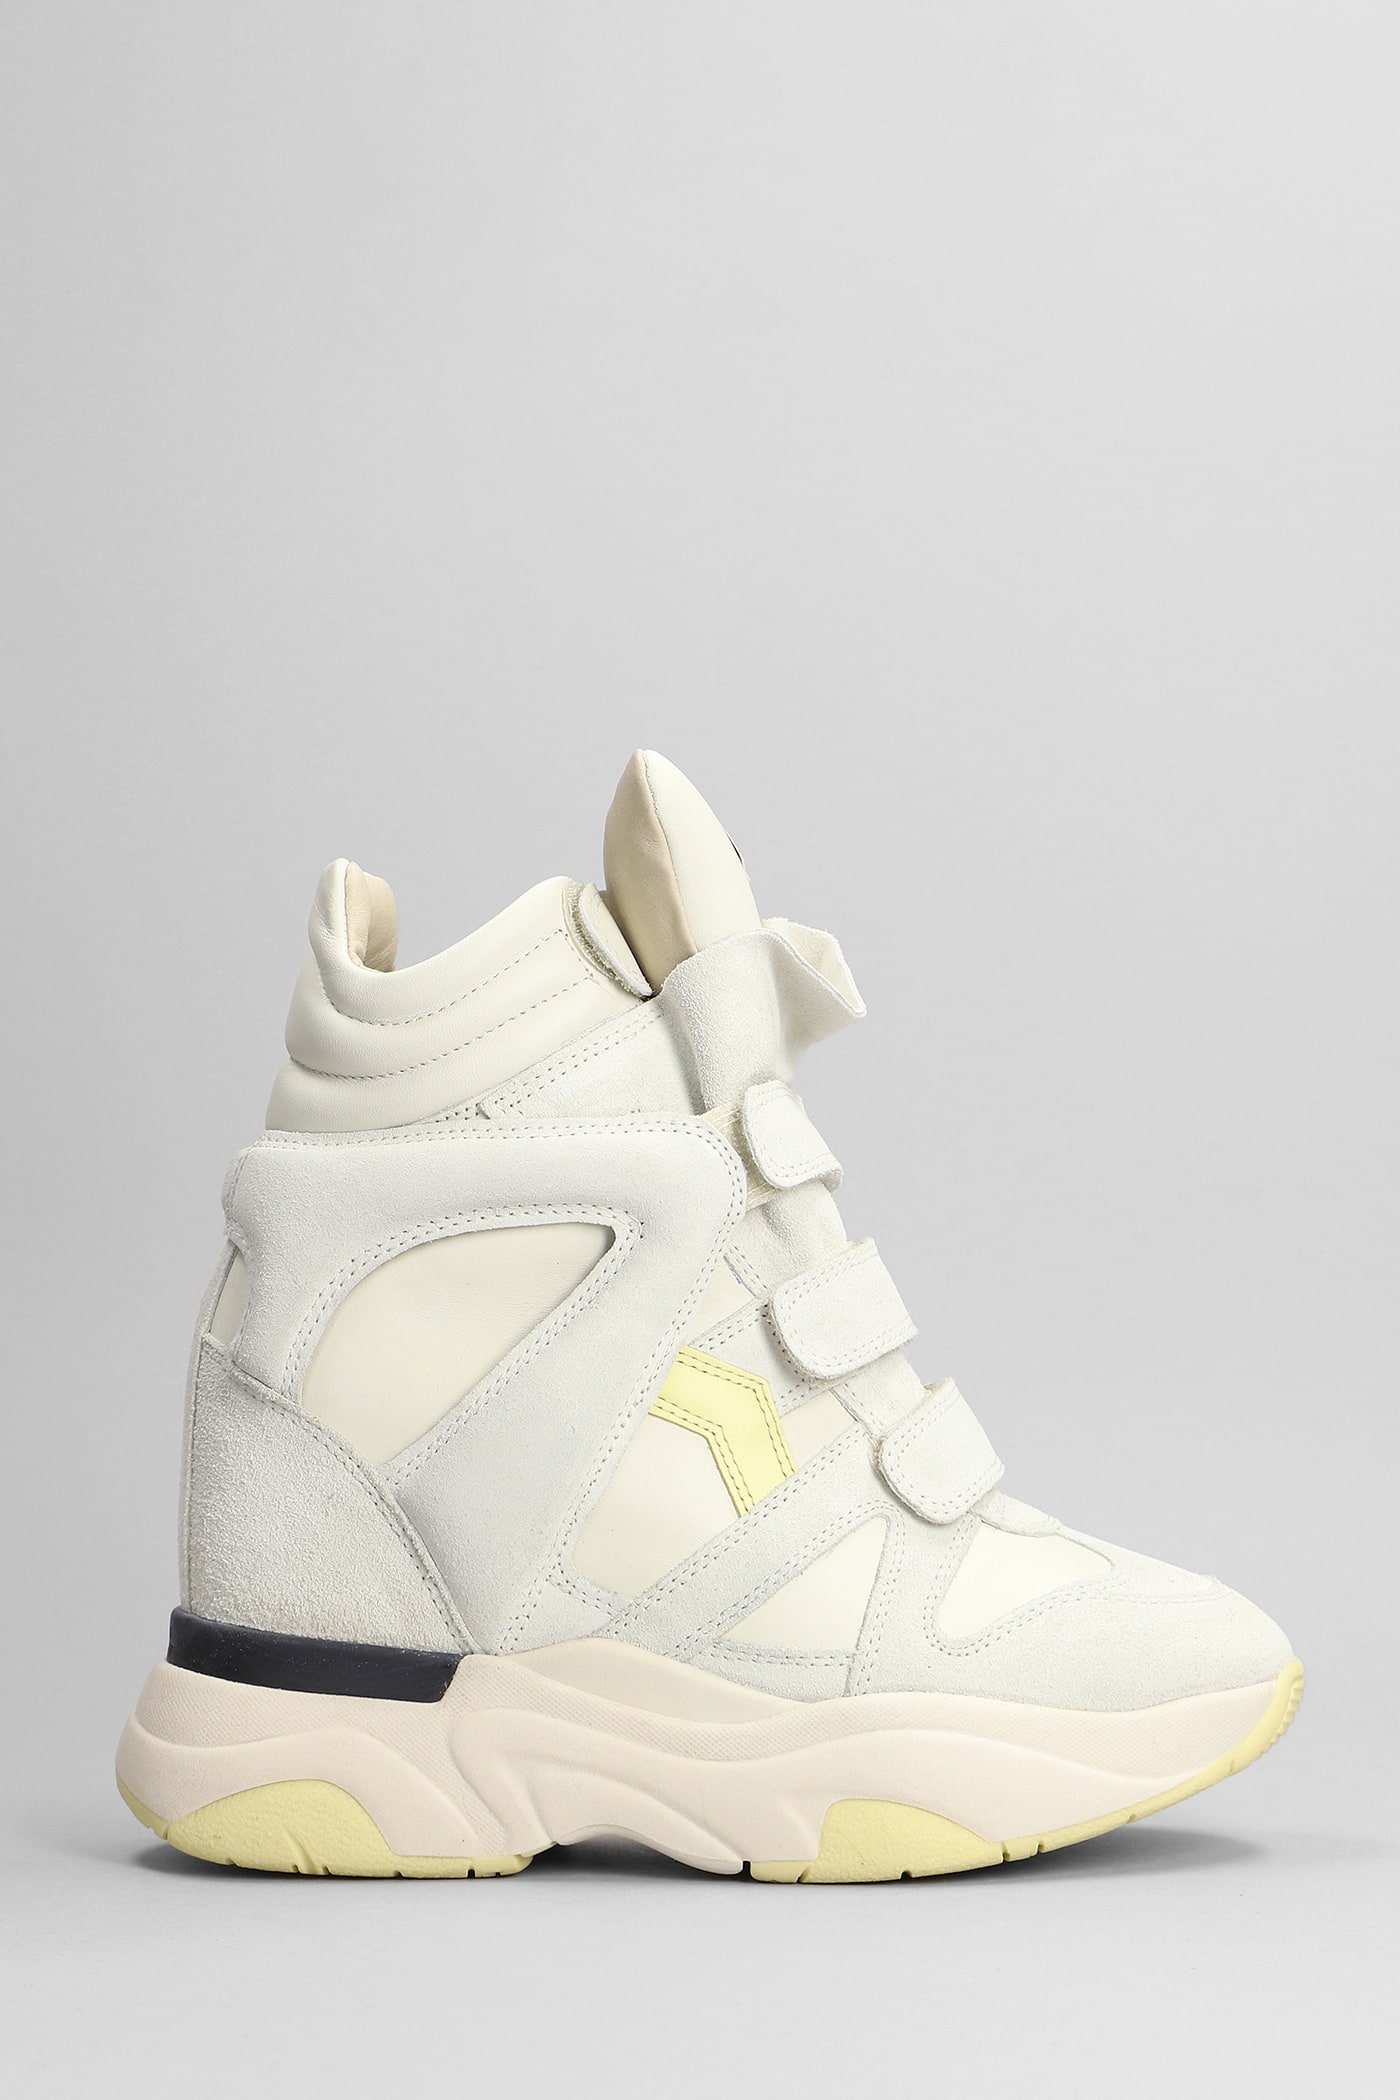 ISABEL MARANT BALSKEE SNEAKERS IN WHITE LEATHER